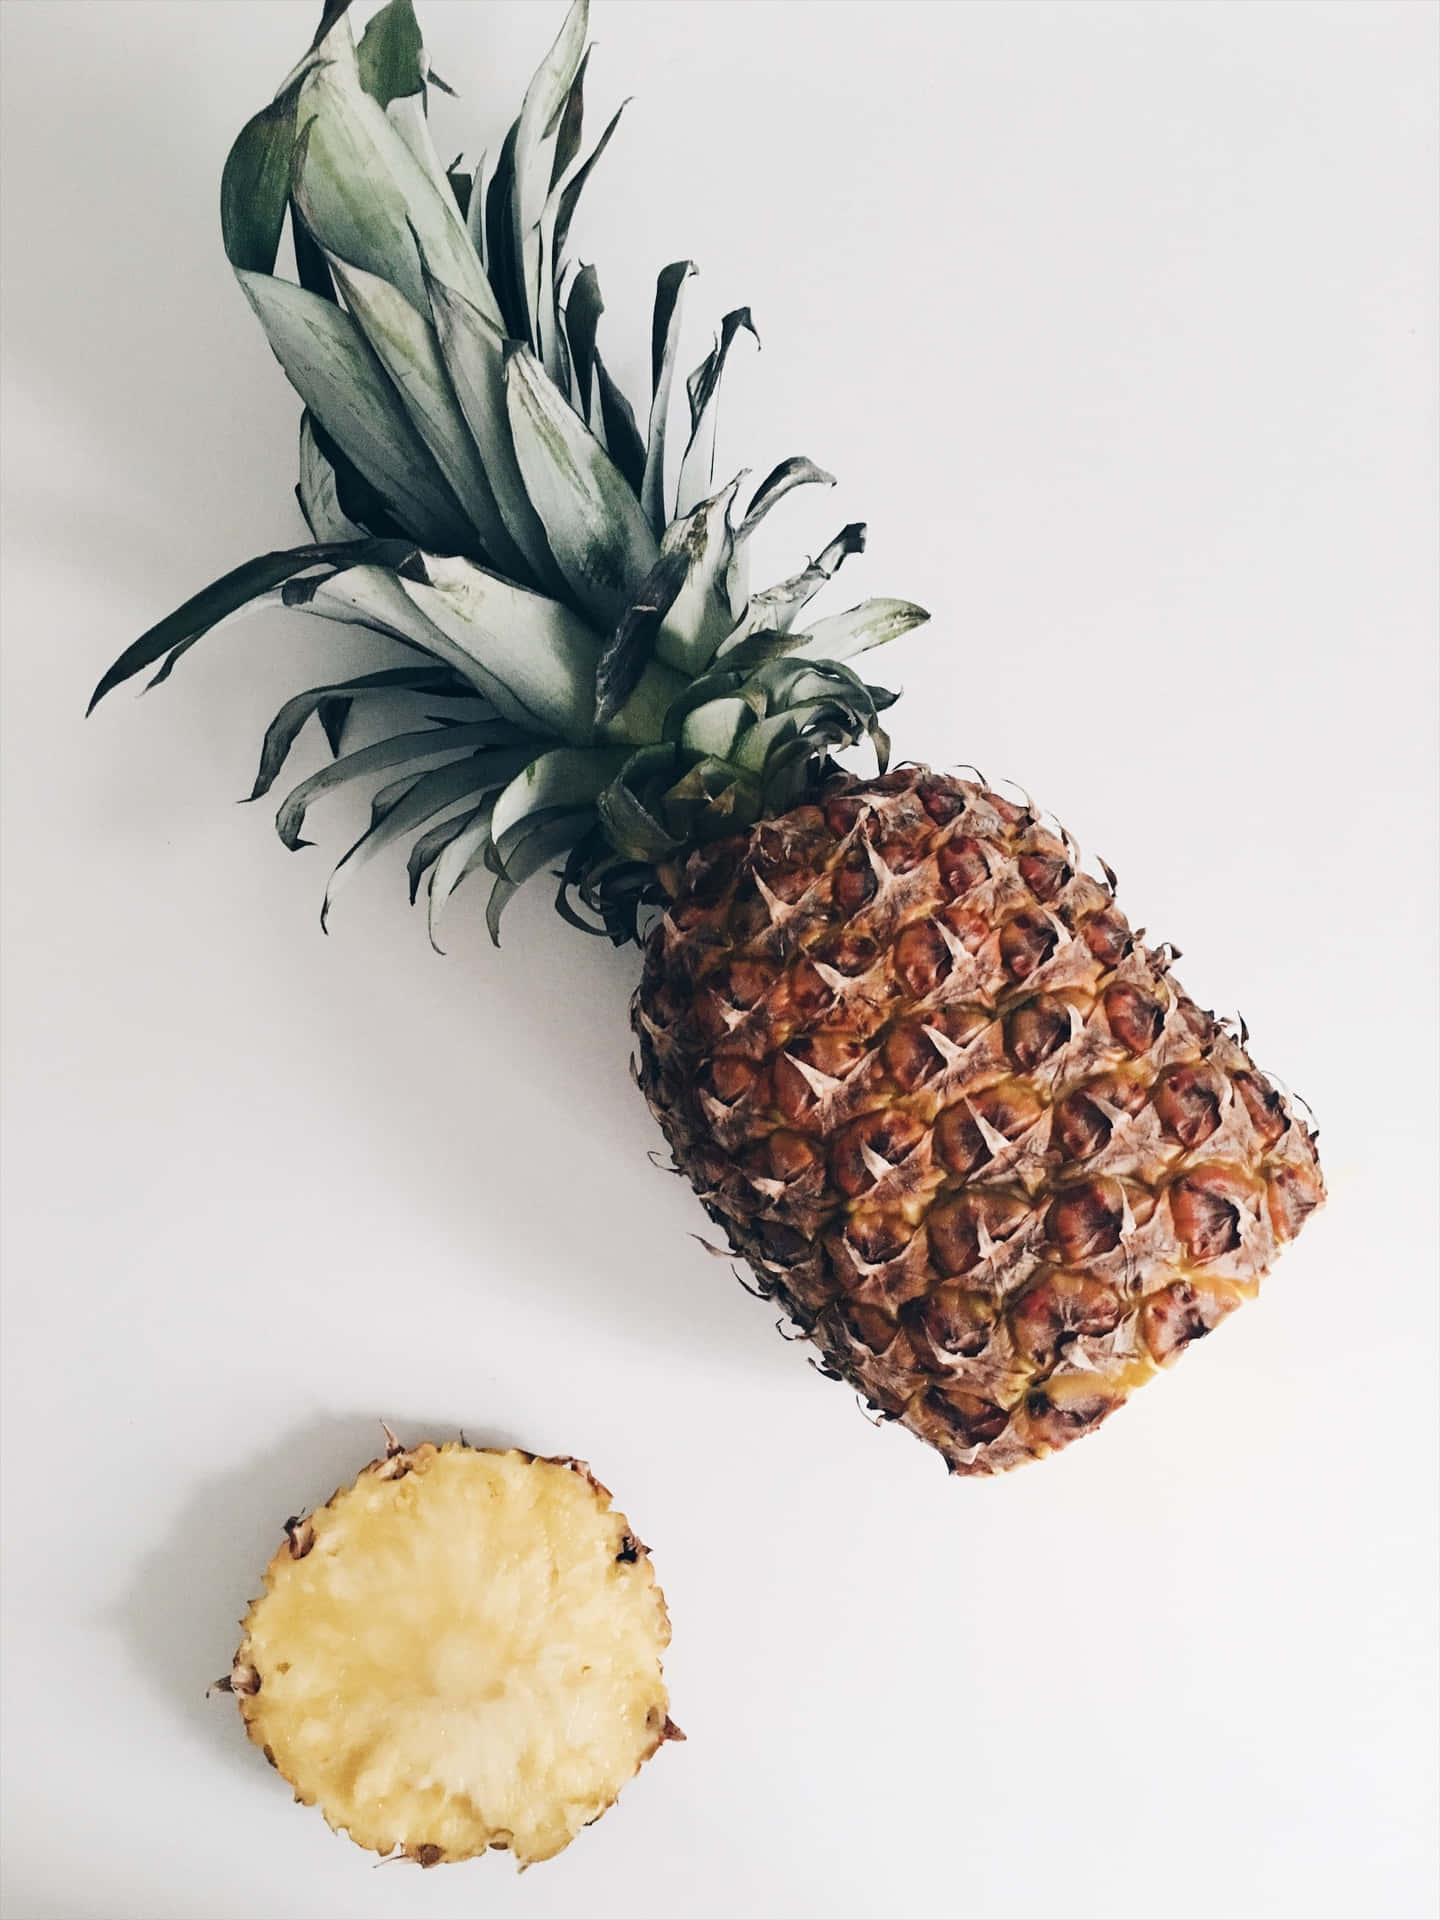 Enjoy the tropical flavor of pineapple